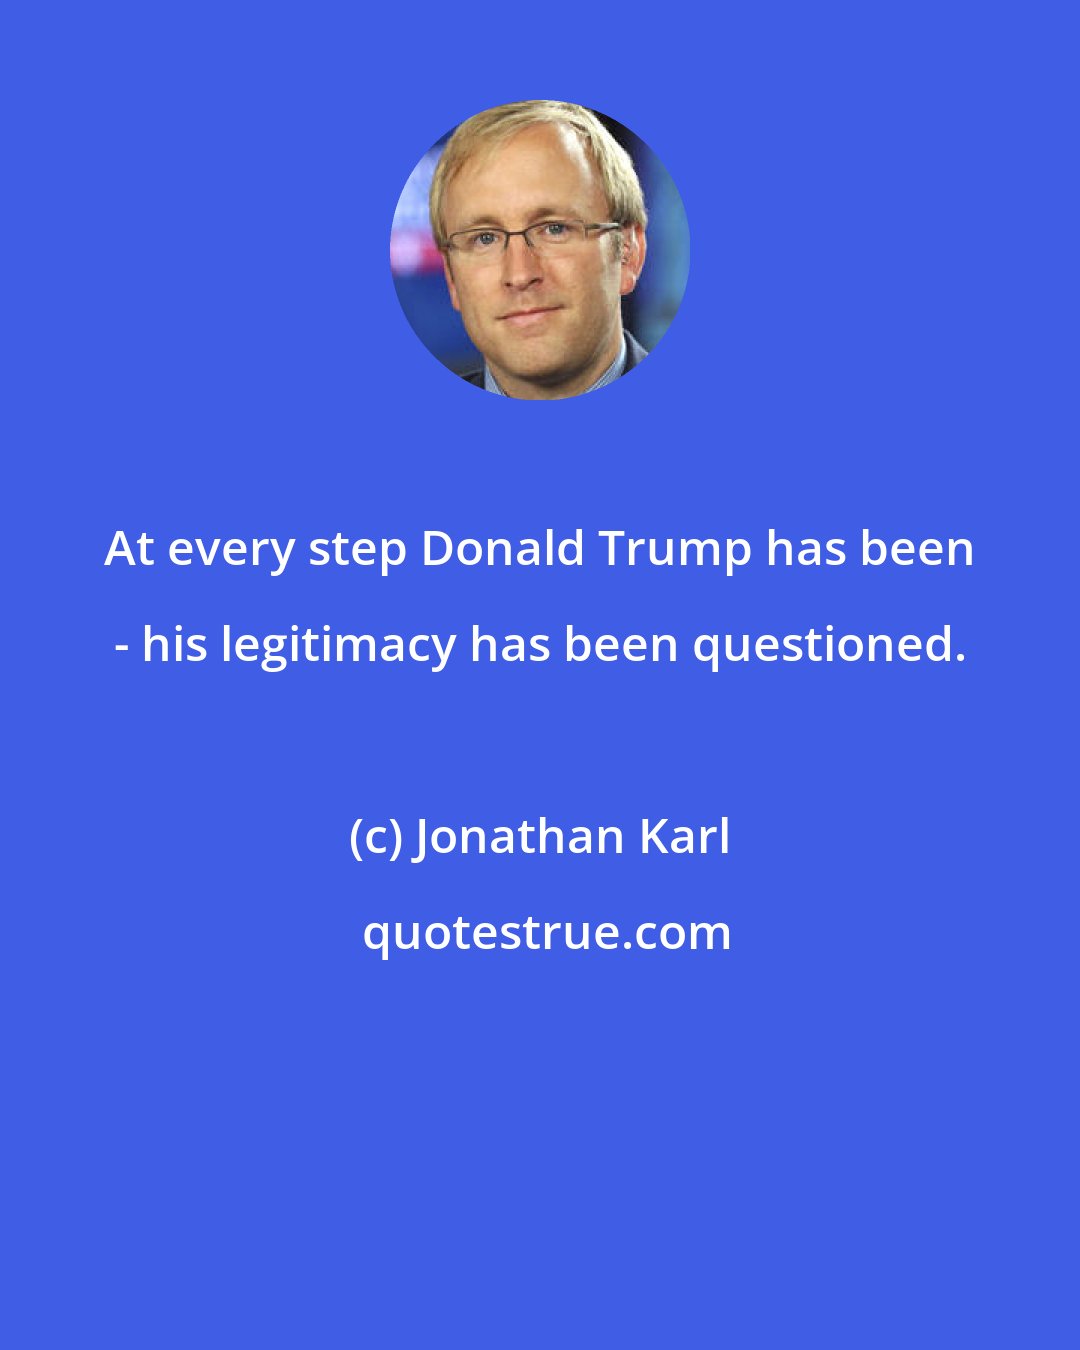 Jonathan Karl: At every step Donald Trump has been - his legitimacy has been questioned.